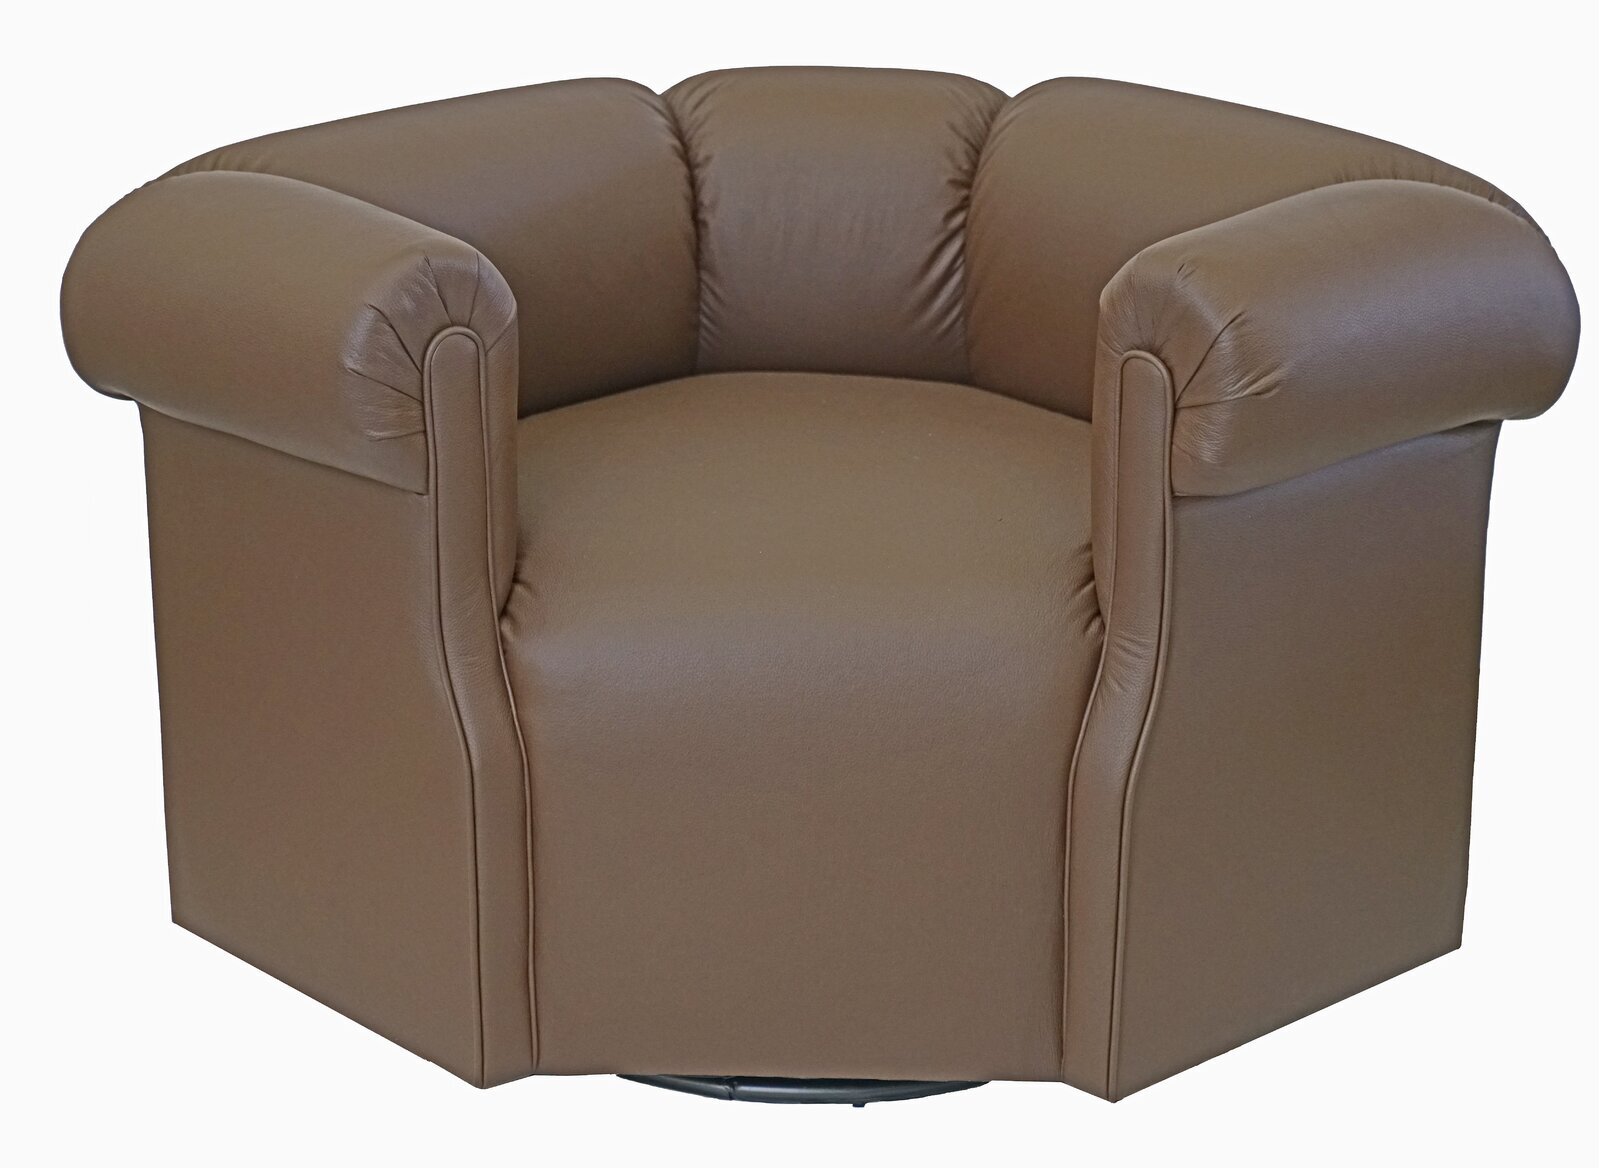 A wide barrel chair with high arms